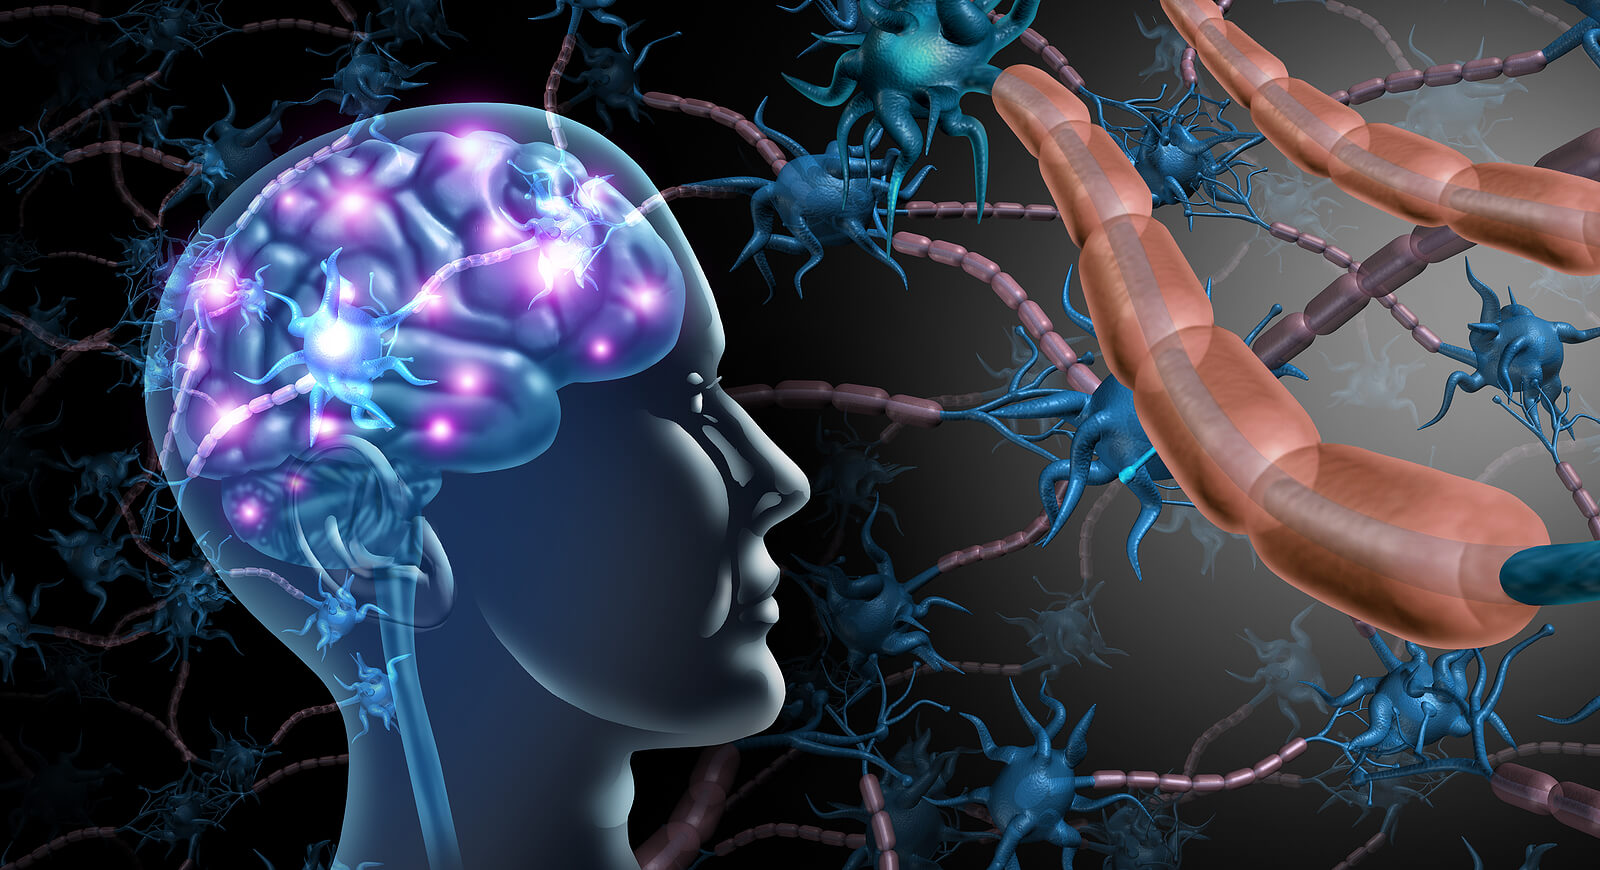 Differences between multiple sclerosis and ALS include the evolution of symptoms.